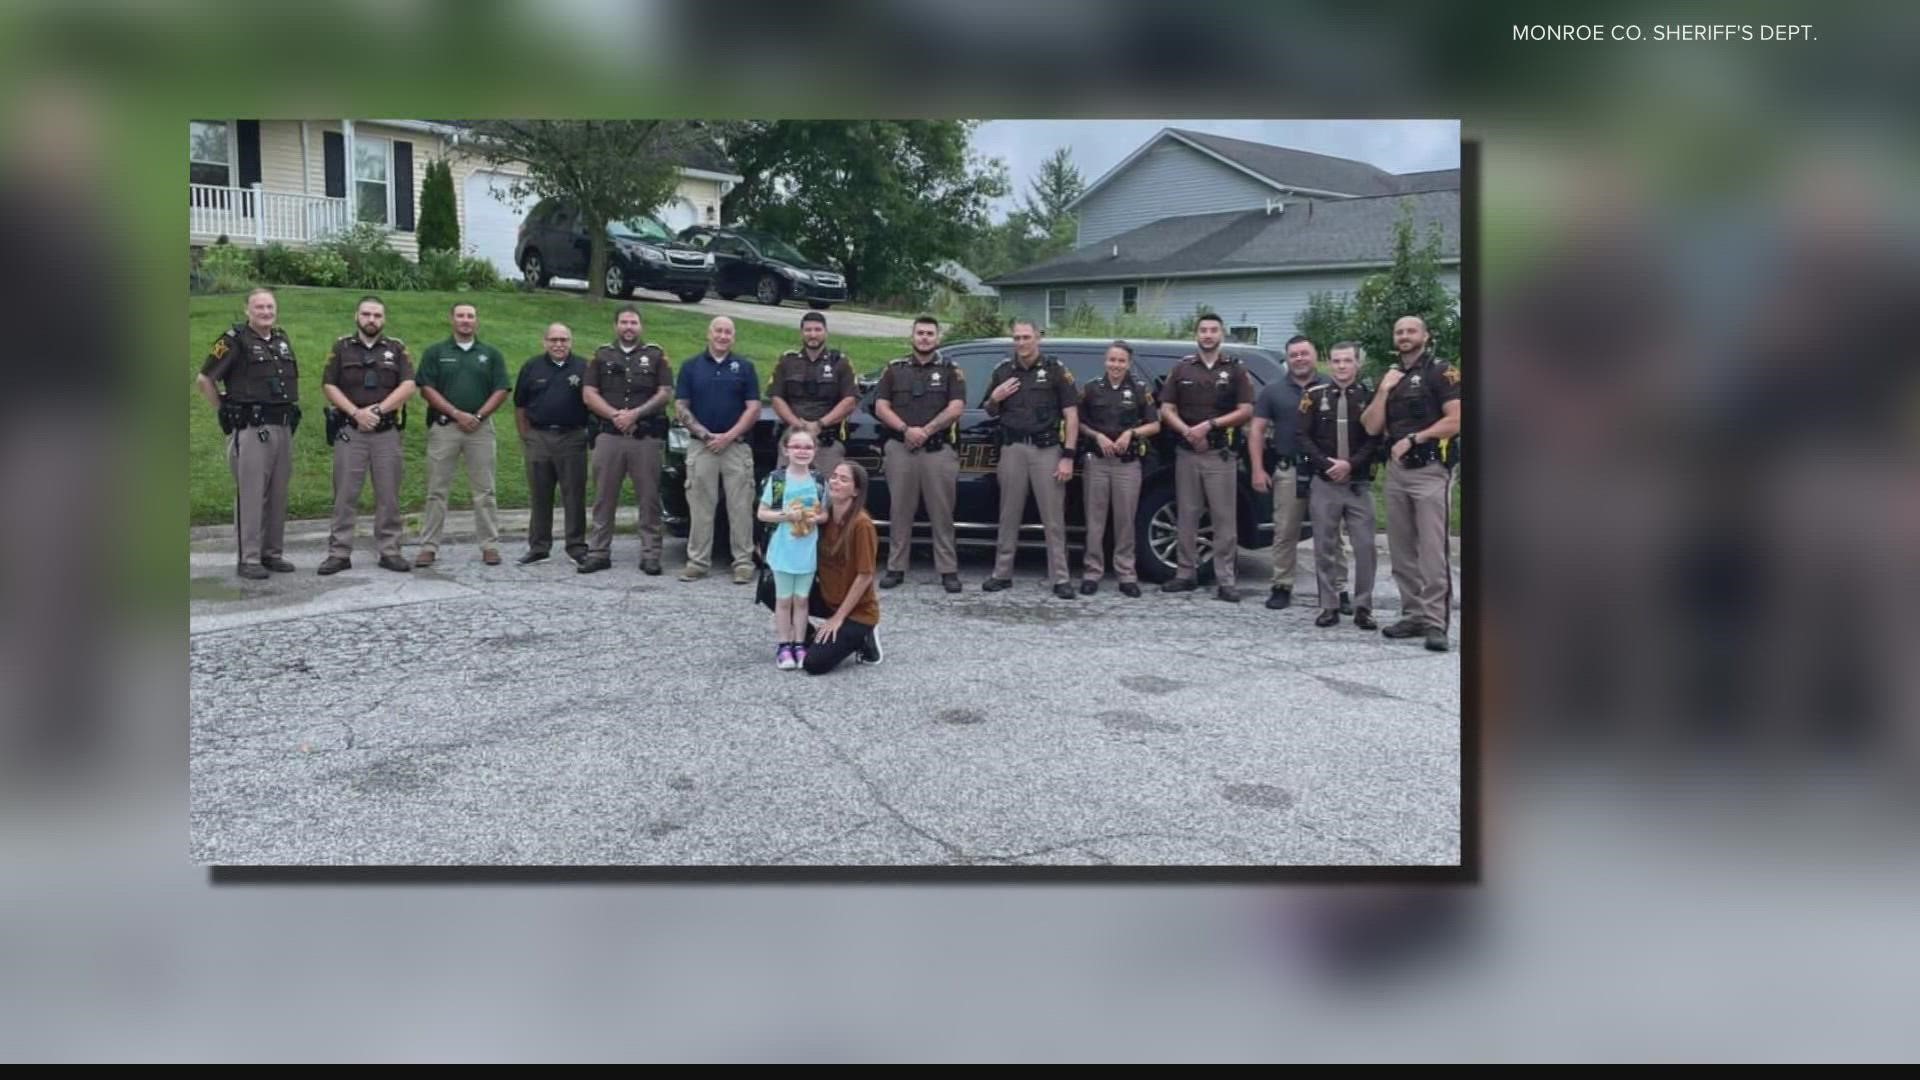 Monroe County Sheriff's Deputies came out today to escort the daughter of a fallen Monroe County Reserve Deputy to school.